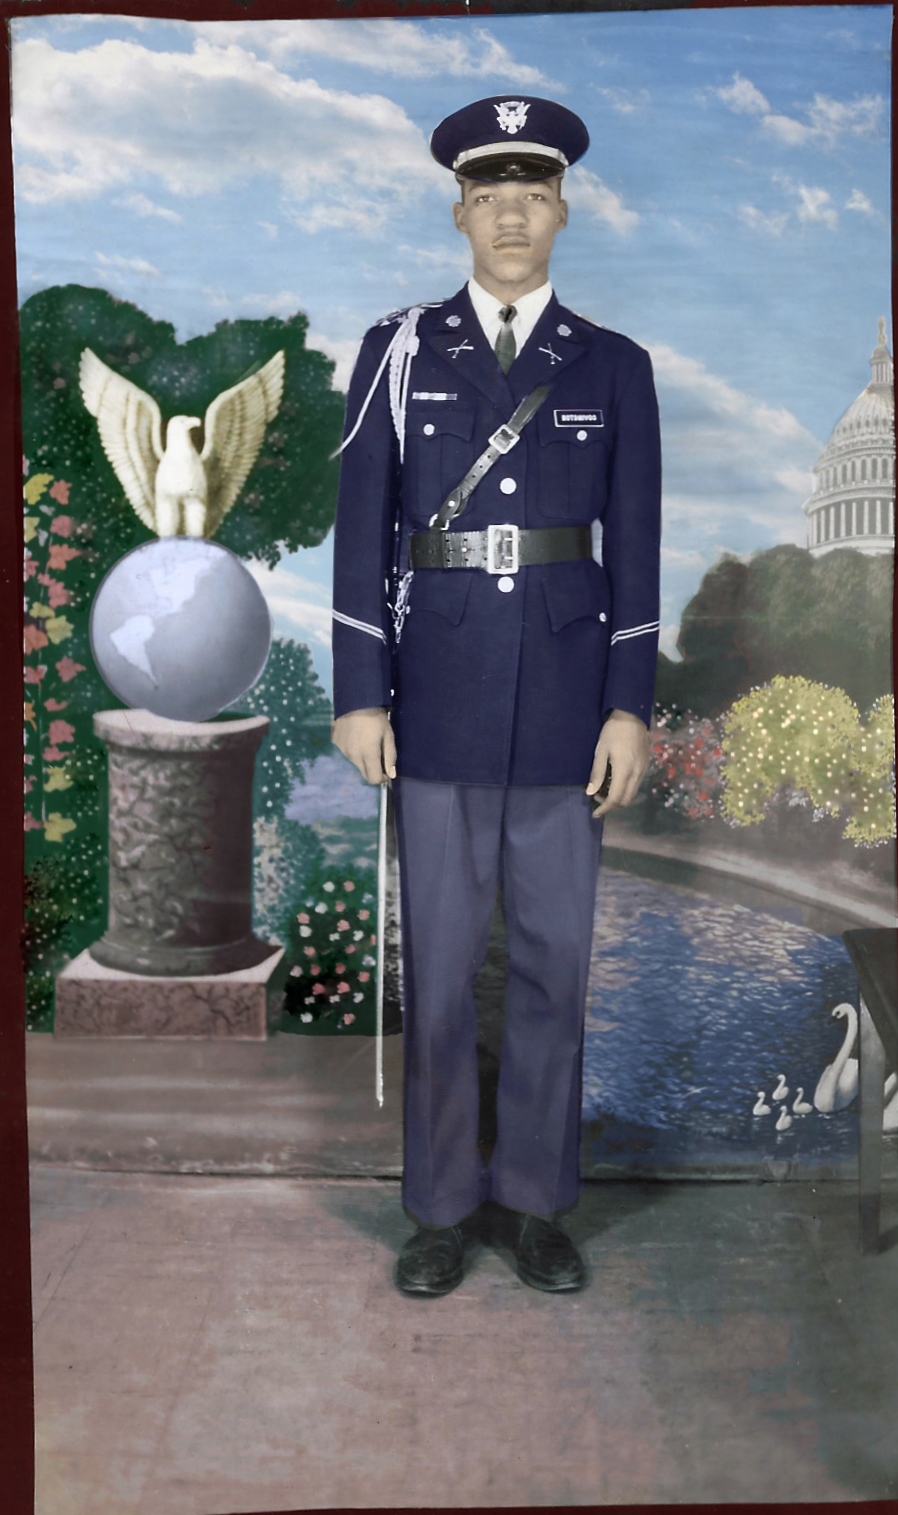 Restored Image of a Military Man